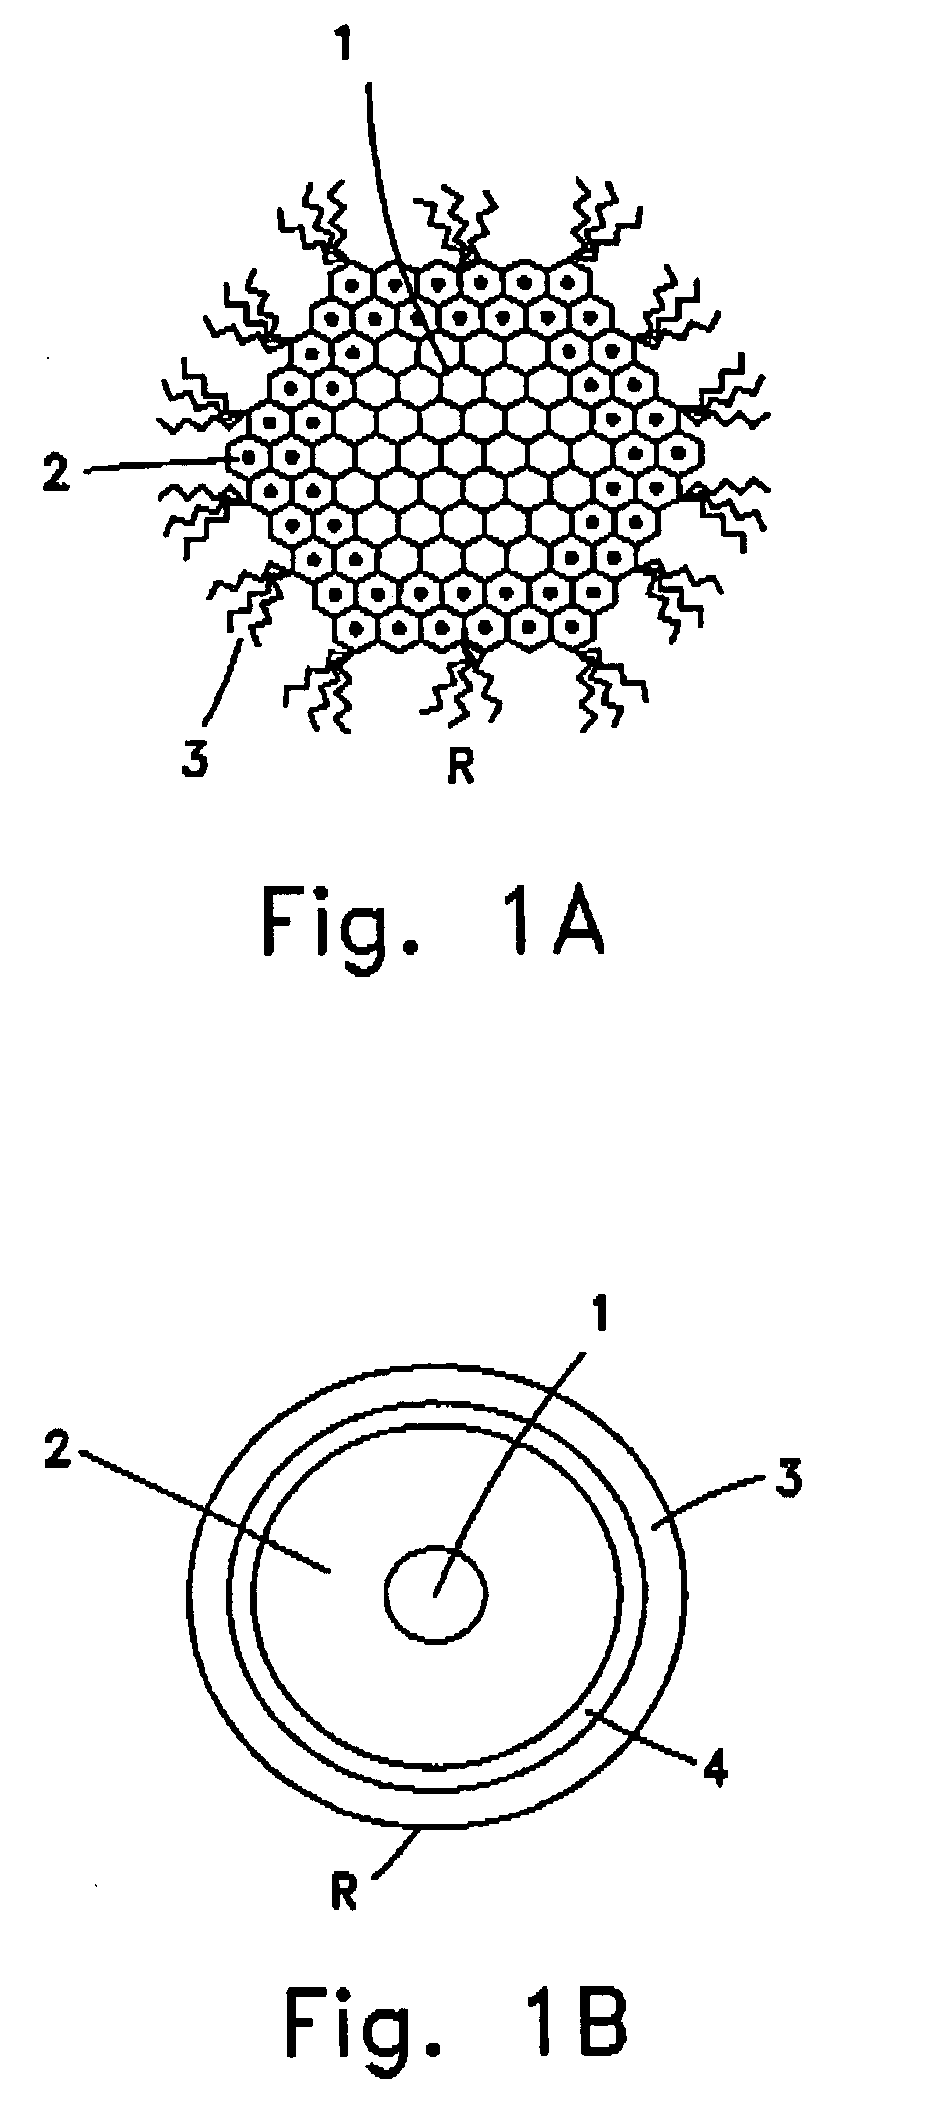 Near infra-red composite polymer-nanocrystal materials and electro-optical devices produced therefrom